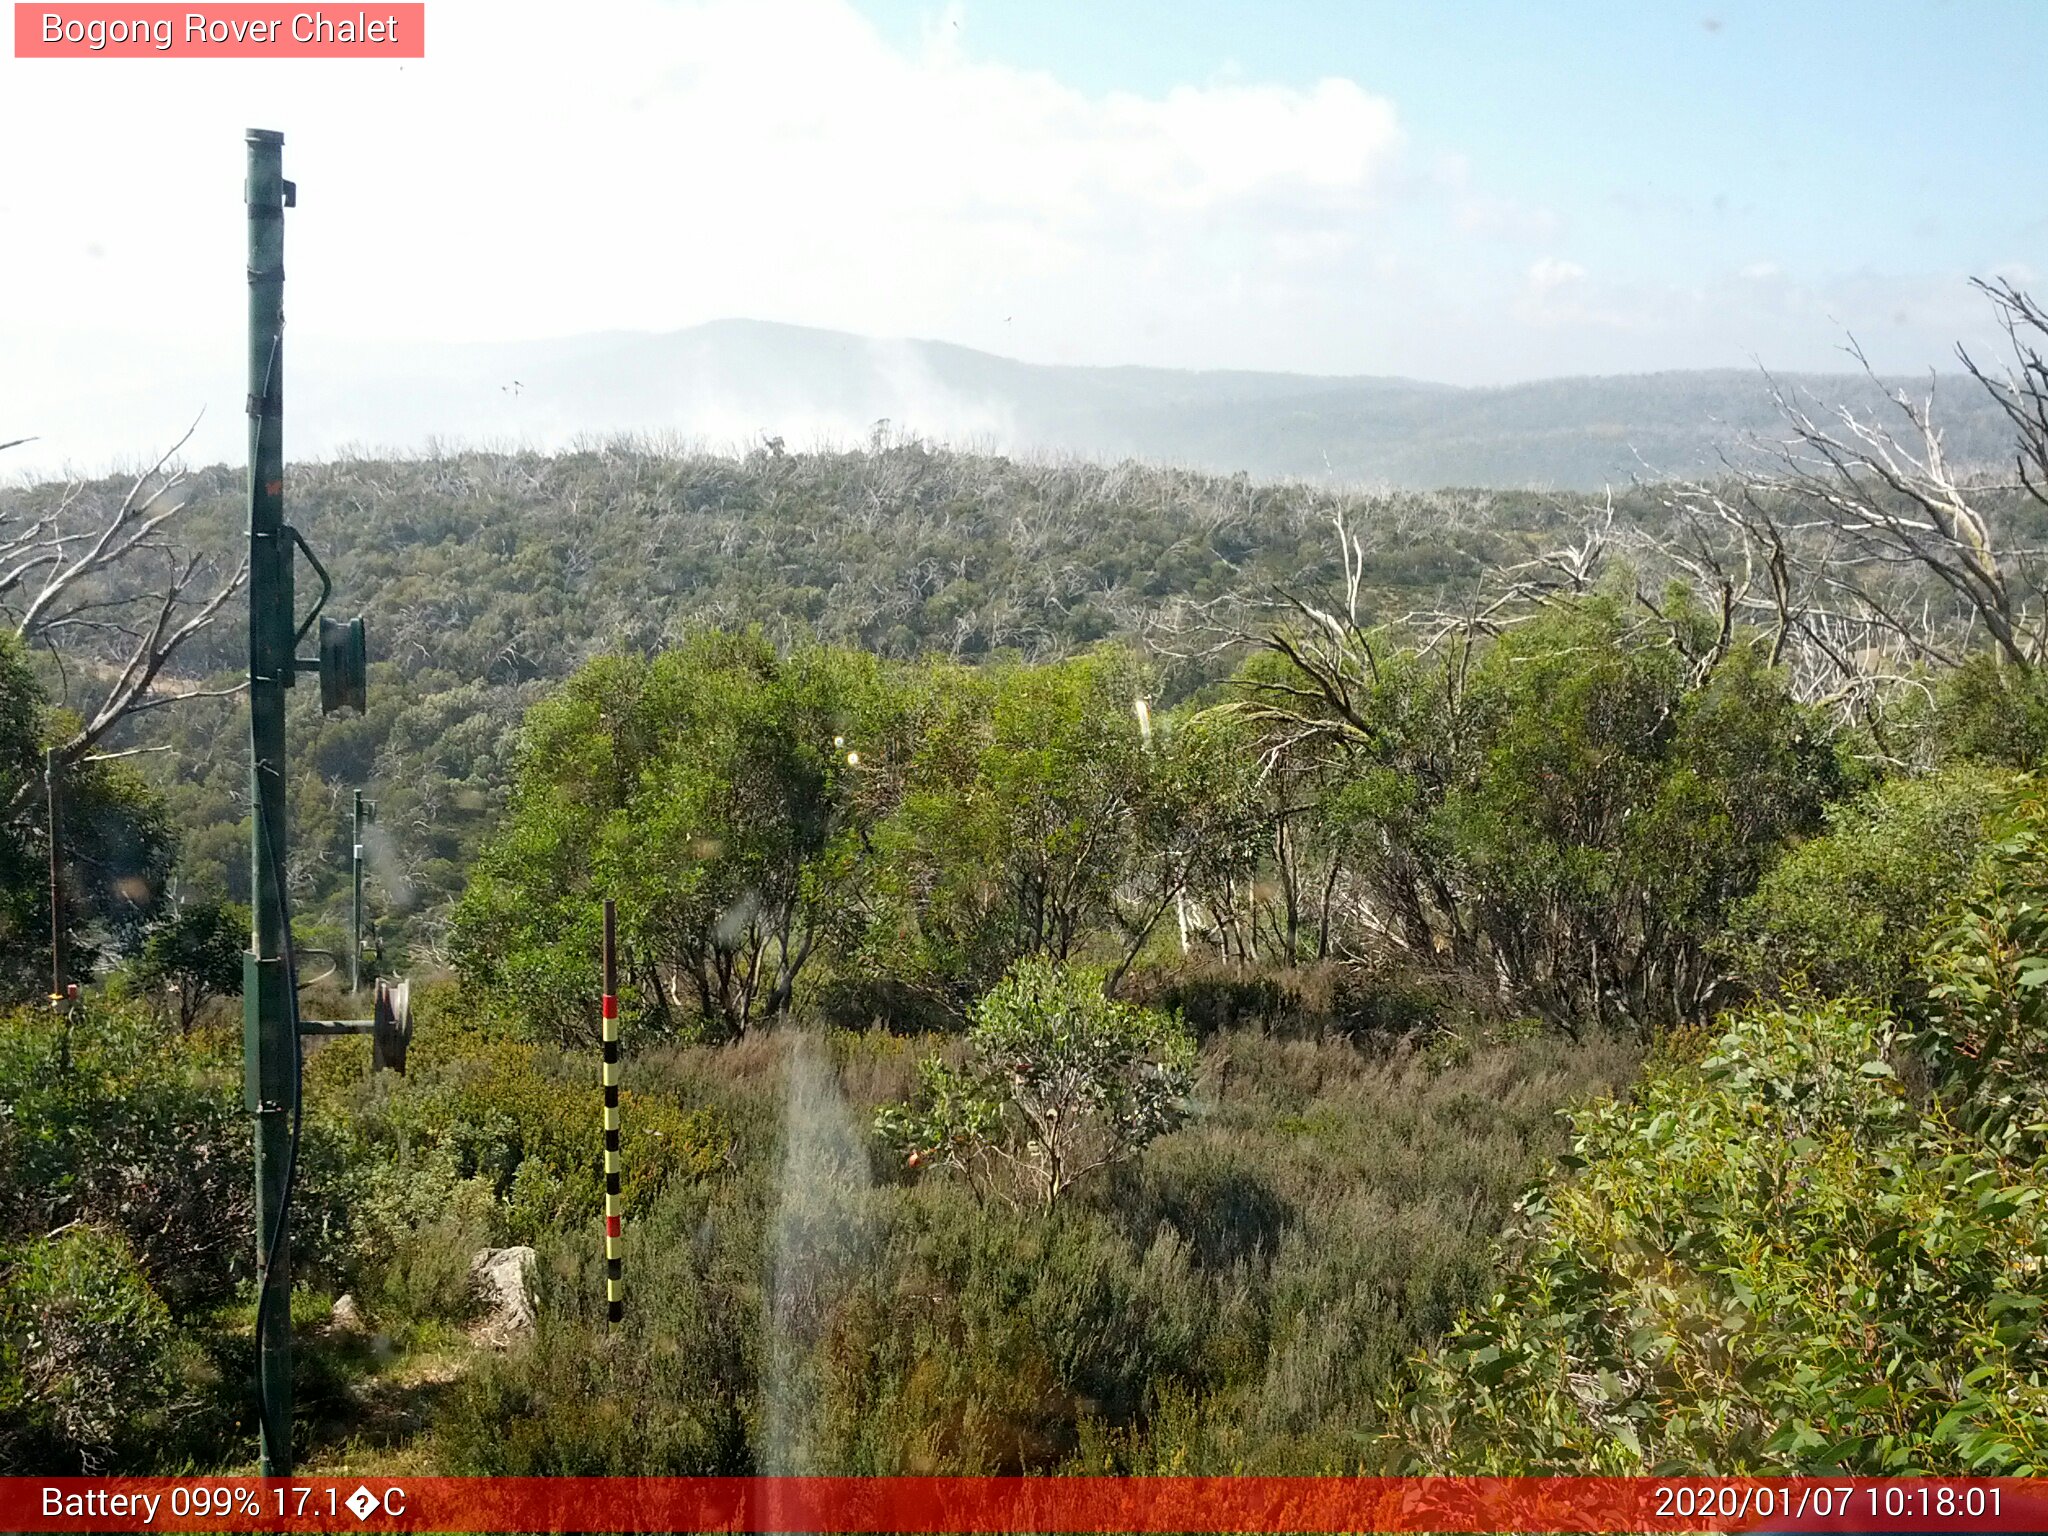 Bogong Web Cam 10:18am Tuesday 7th of January 2020